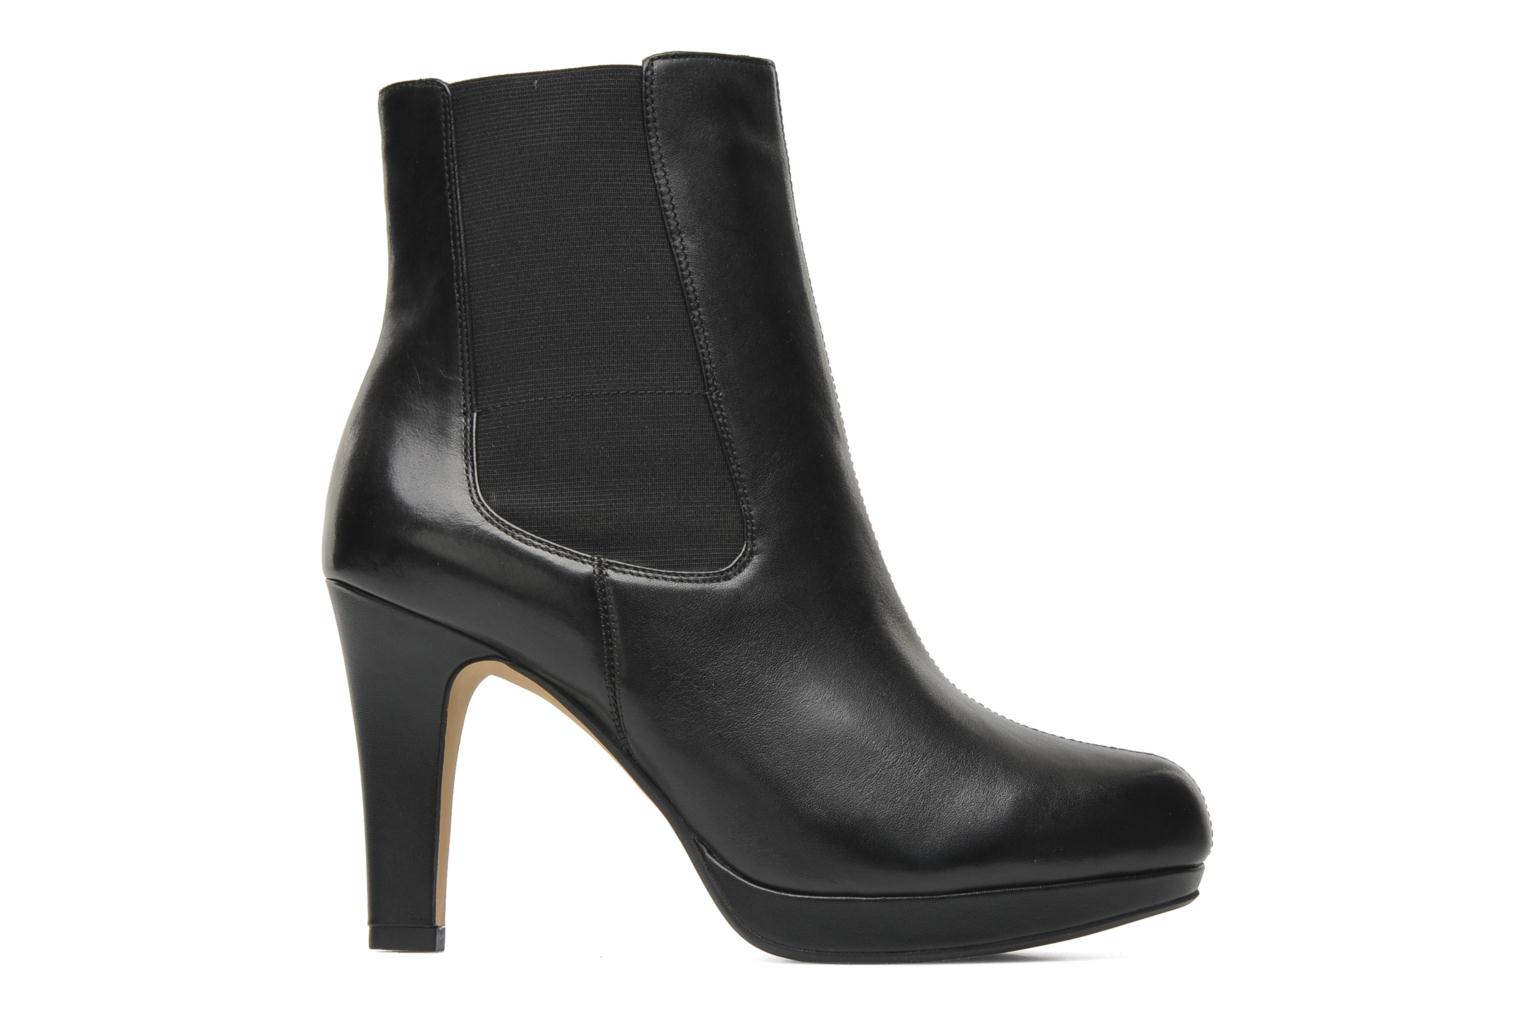 Clarks Kendra August Ankle boots in Black at Sarenza.co.uk (146624)